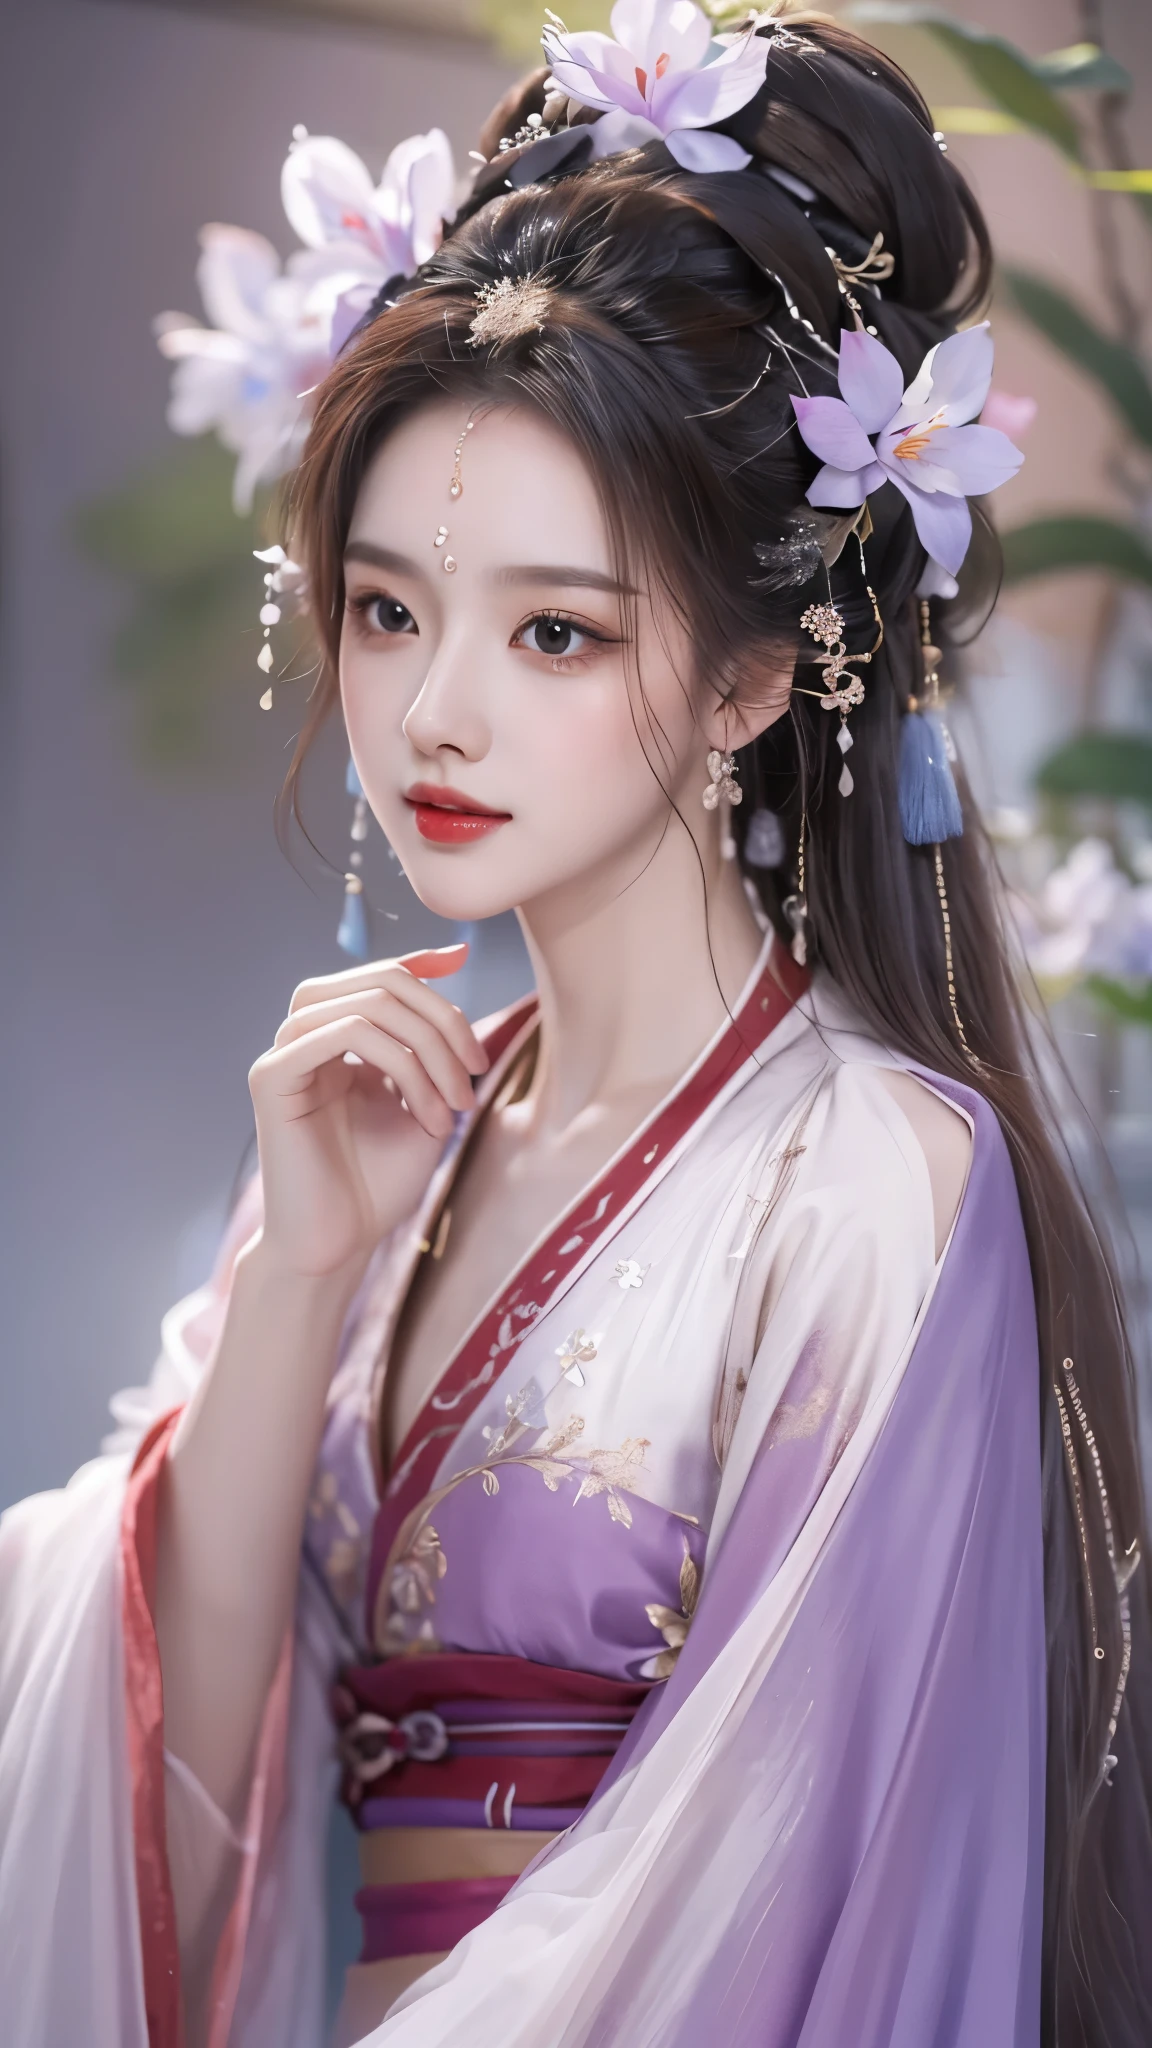 hanfu-song, hanfu, song theme, bandeau, tube top, ((knee shot)), ((masterpiece, best quality)), ((bare shoulders)), ((The skirt is short)), ((Sexy slender legs)), red lips, a mature woman, cosmetic, lifelike、real picture、((realistically:1.5))、White phalaenopsis around hair，Lilac dendrobium、White Lily、1 girl、brown hair、flowing hair、plump breasts, slim body, Charming legs, bright smile, strike an elegant pose, Have extremely beautiful facial features、hairpins on head、perfect hands、(night、moon、cliff)、 vector art、Chinese contemporary art、soft light、look down